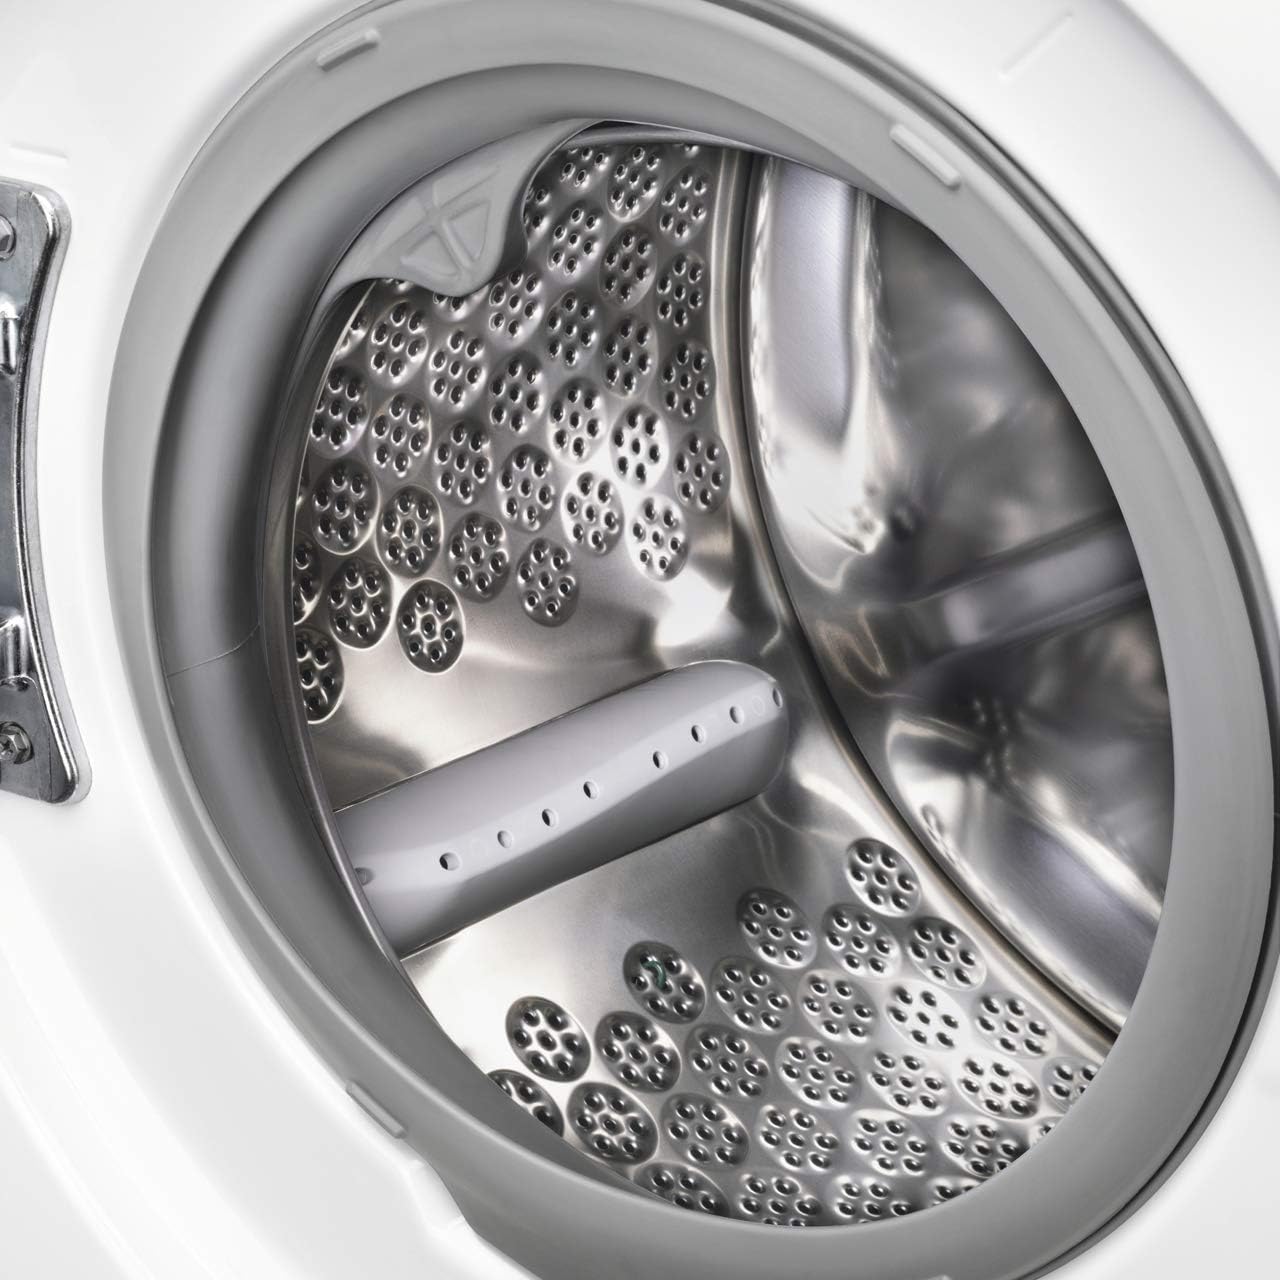 Zanussi Z816WT85BI Integrated 8Kg / 4Kg Washer Dryer with 1600 rpm - Amazing Gadgets Outlet